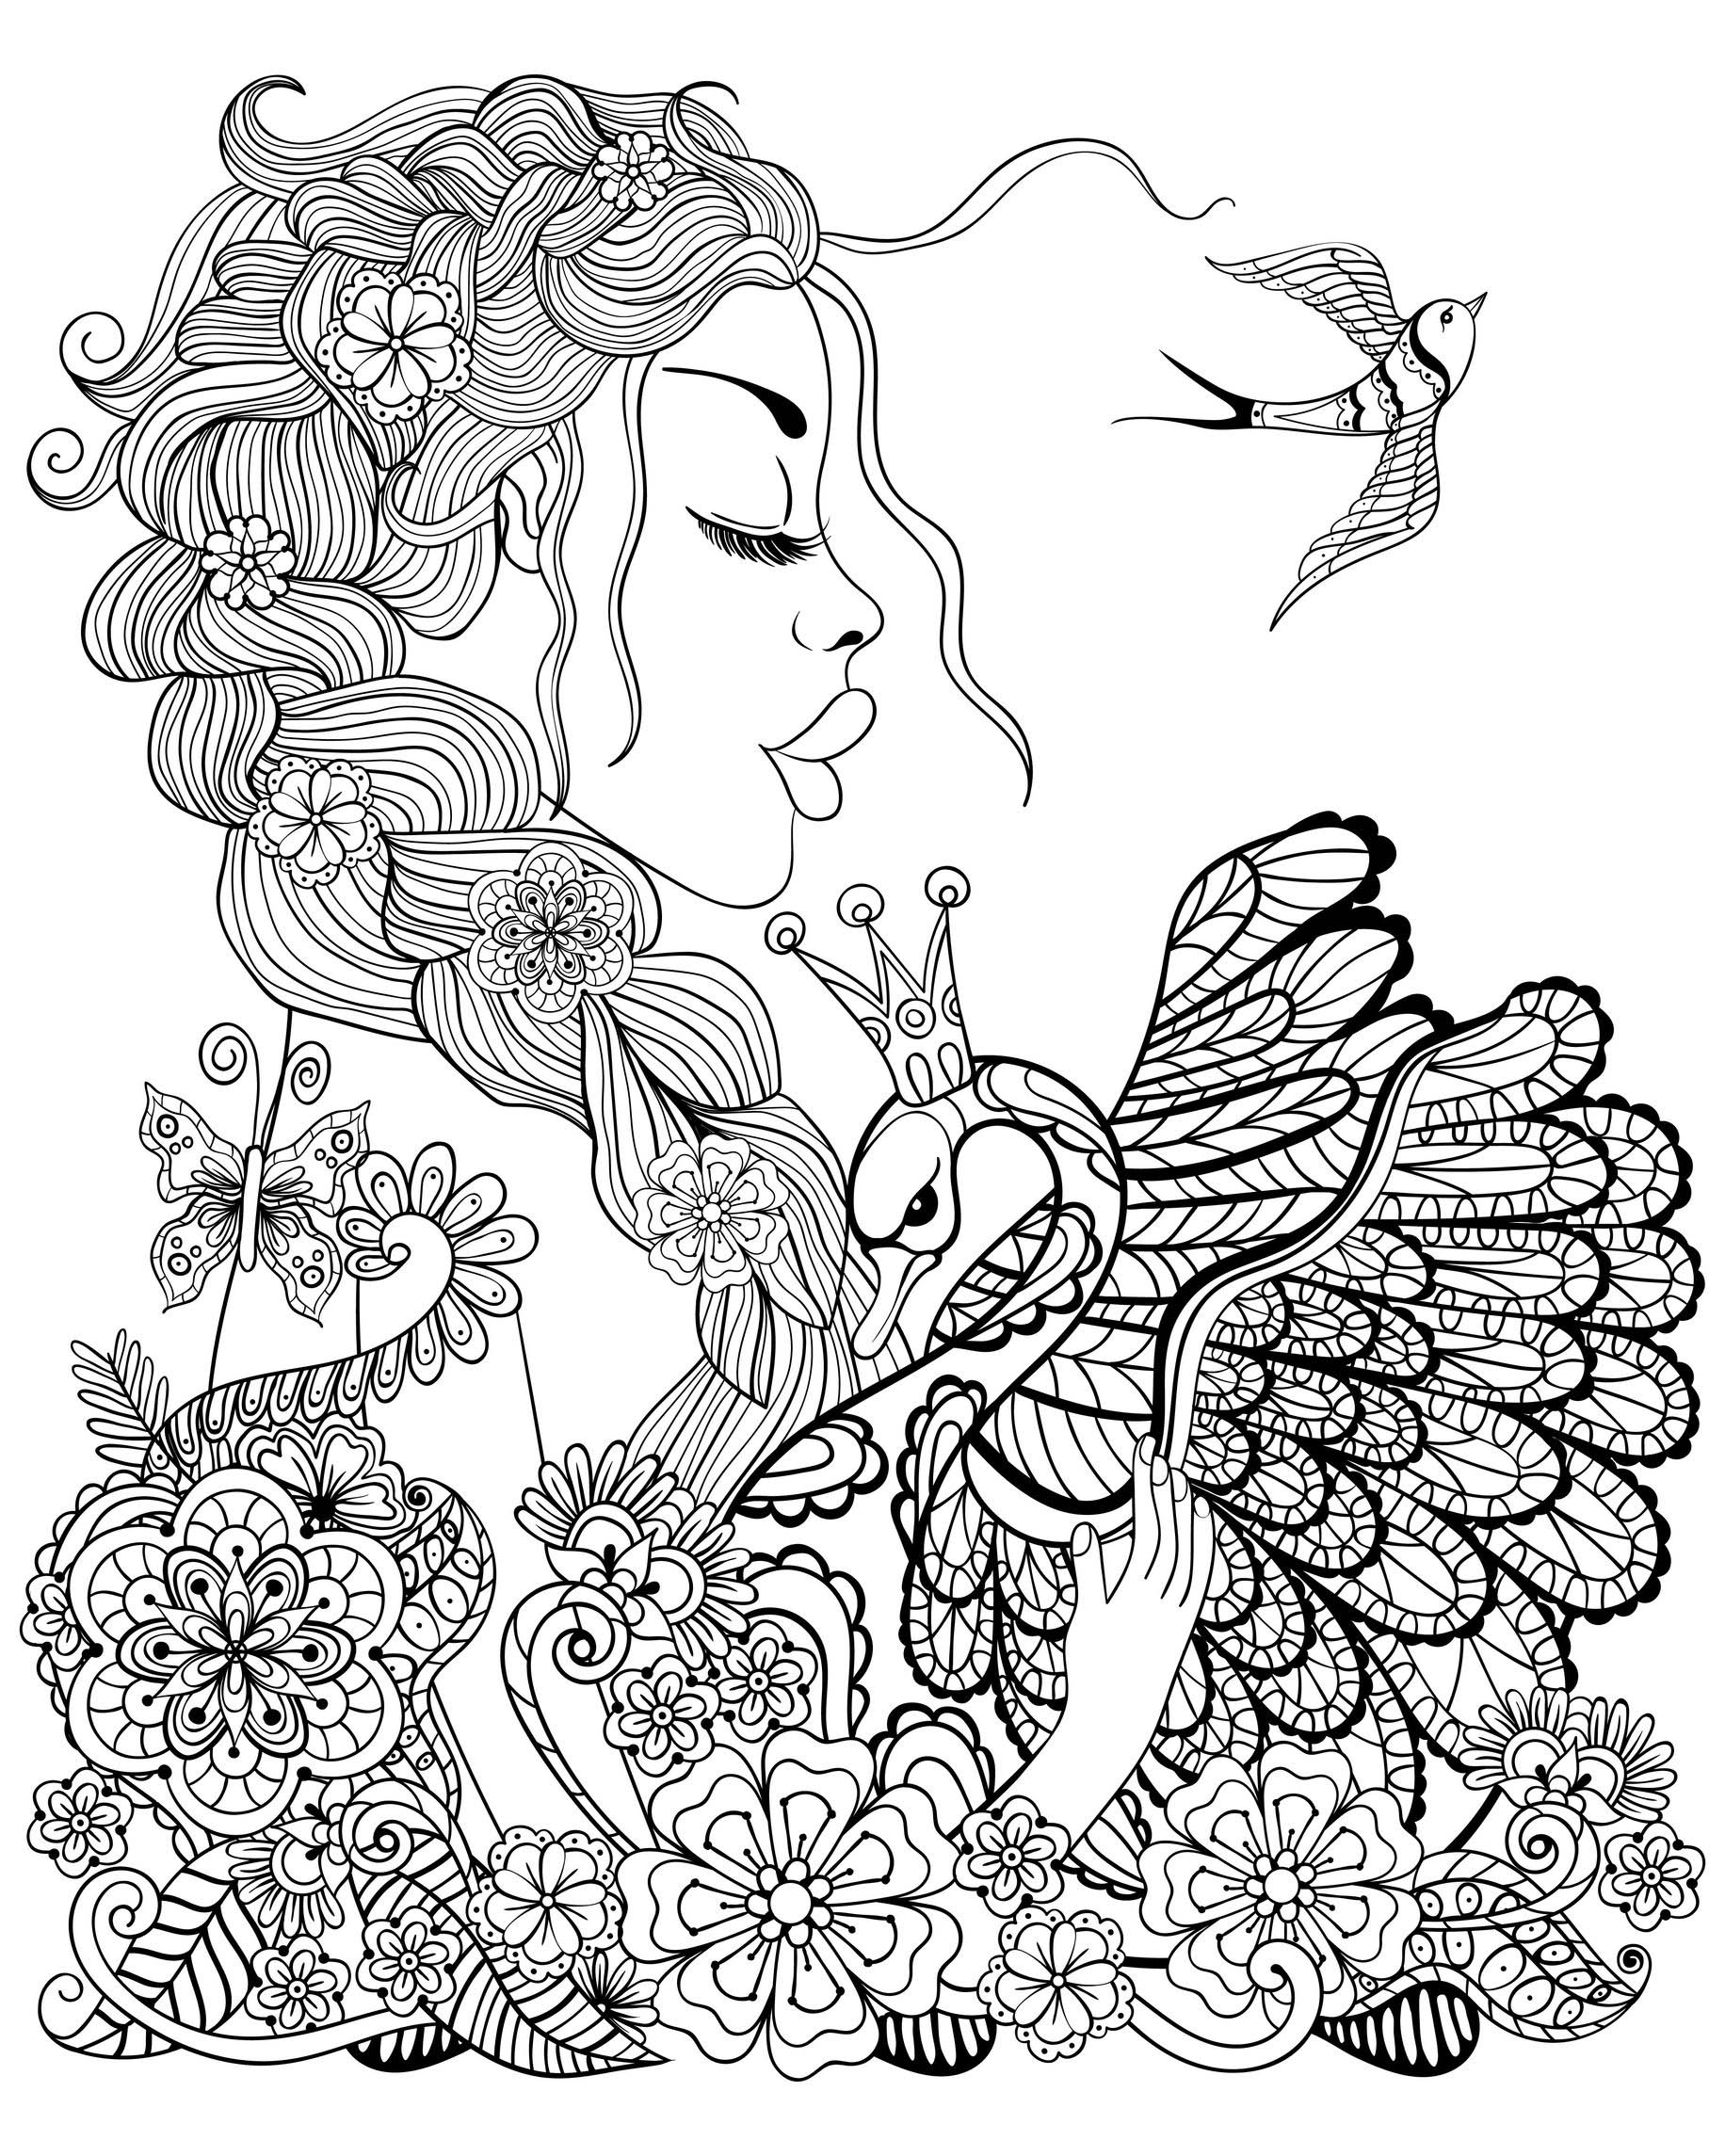 Birds to print - Birds Kids Coloring Pages